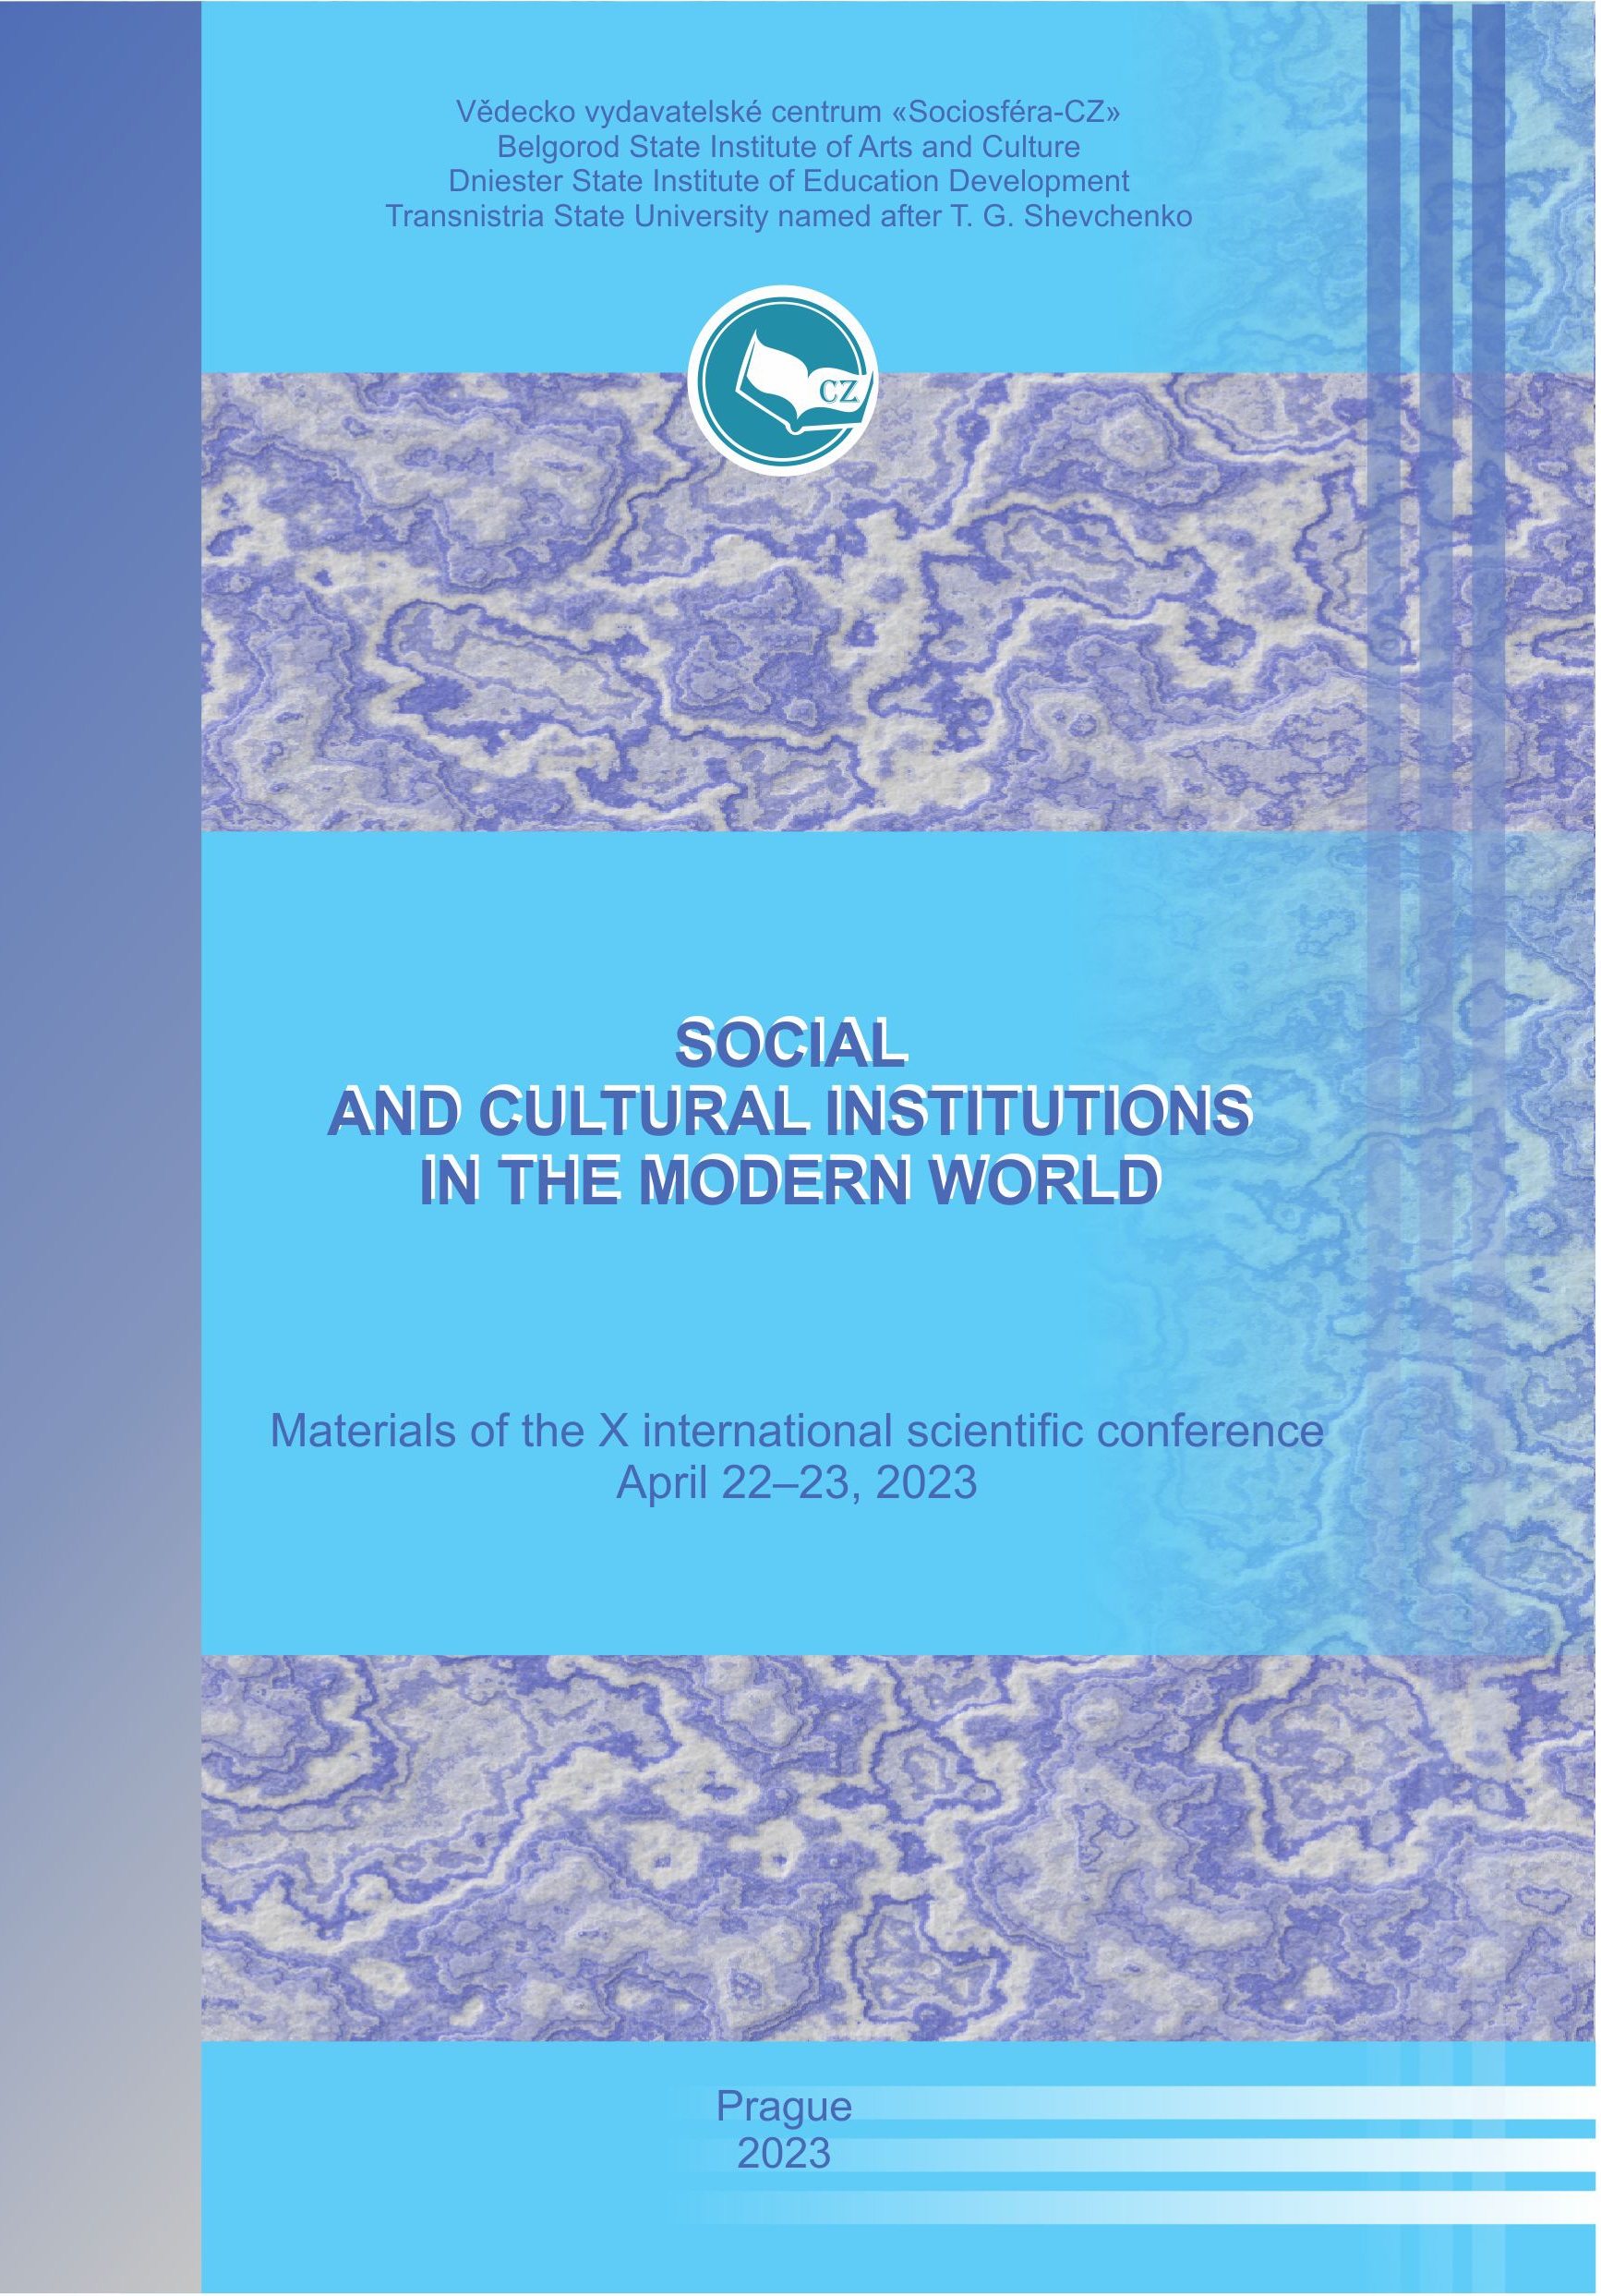 Social and cultural institutions in the modern world